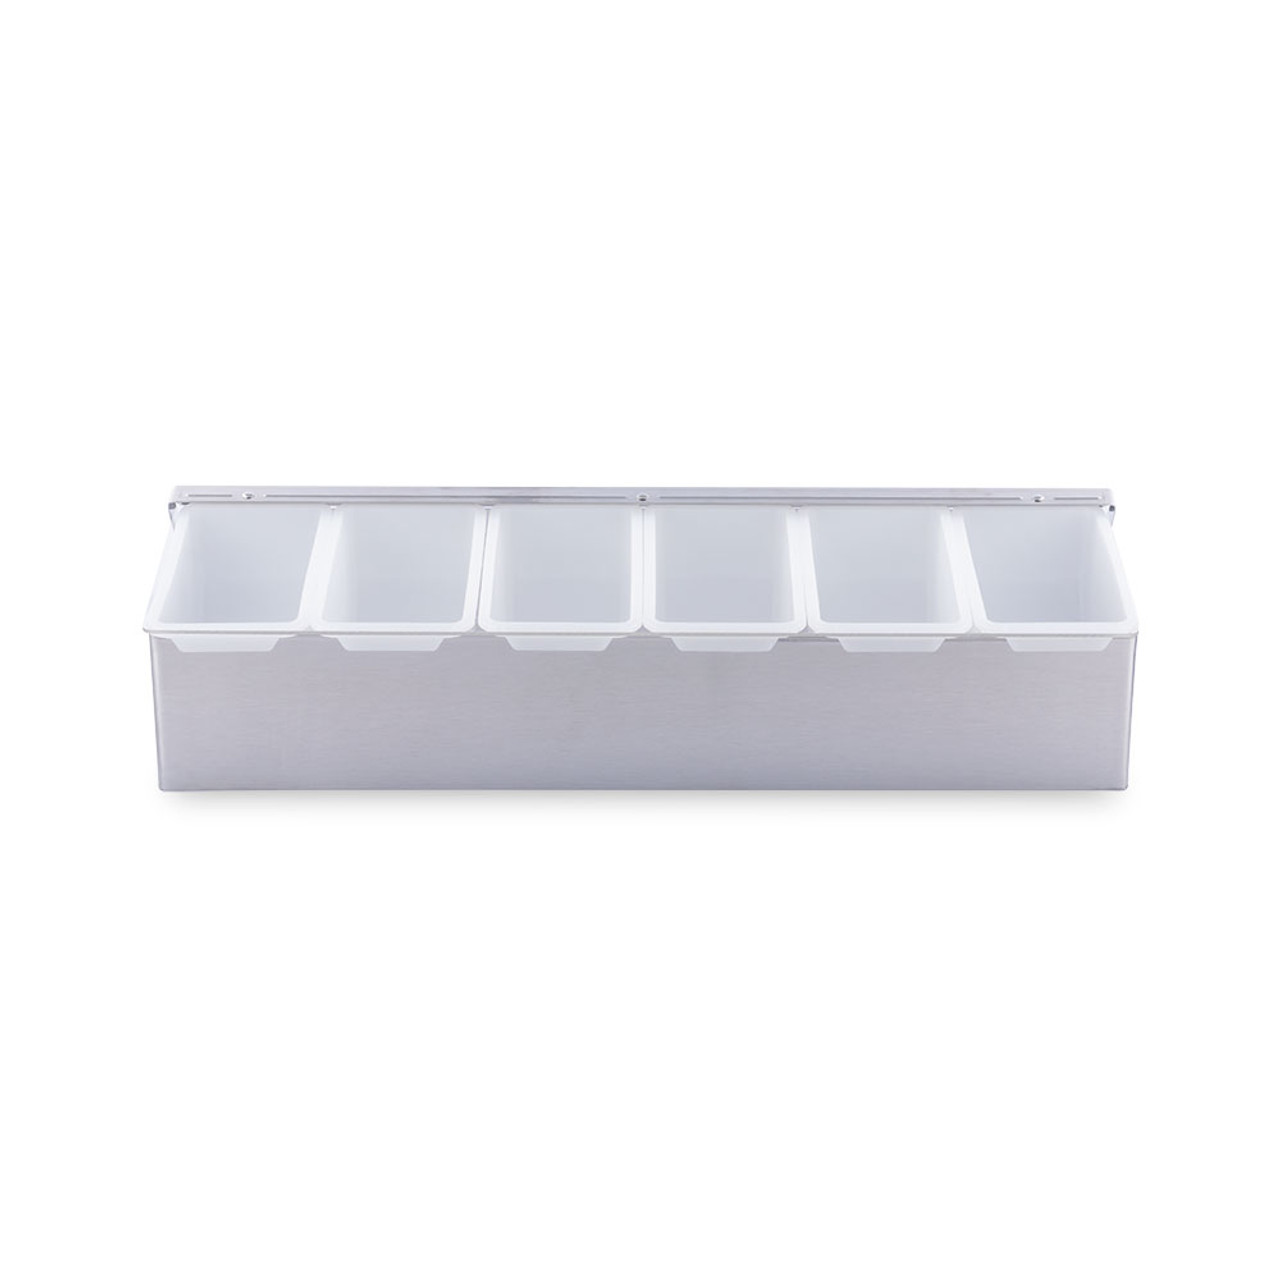 https://cdn11.bigcommerce.com/s-cznxq08r7/images/stencil/1280x1280/products/1258/4985/cdp-6-cocktail-bar-garnish-tray-stainless_steel-6-compartments-4__68250.1590769636.jpg?c=1